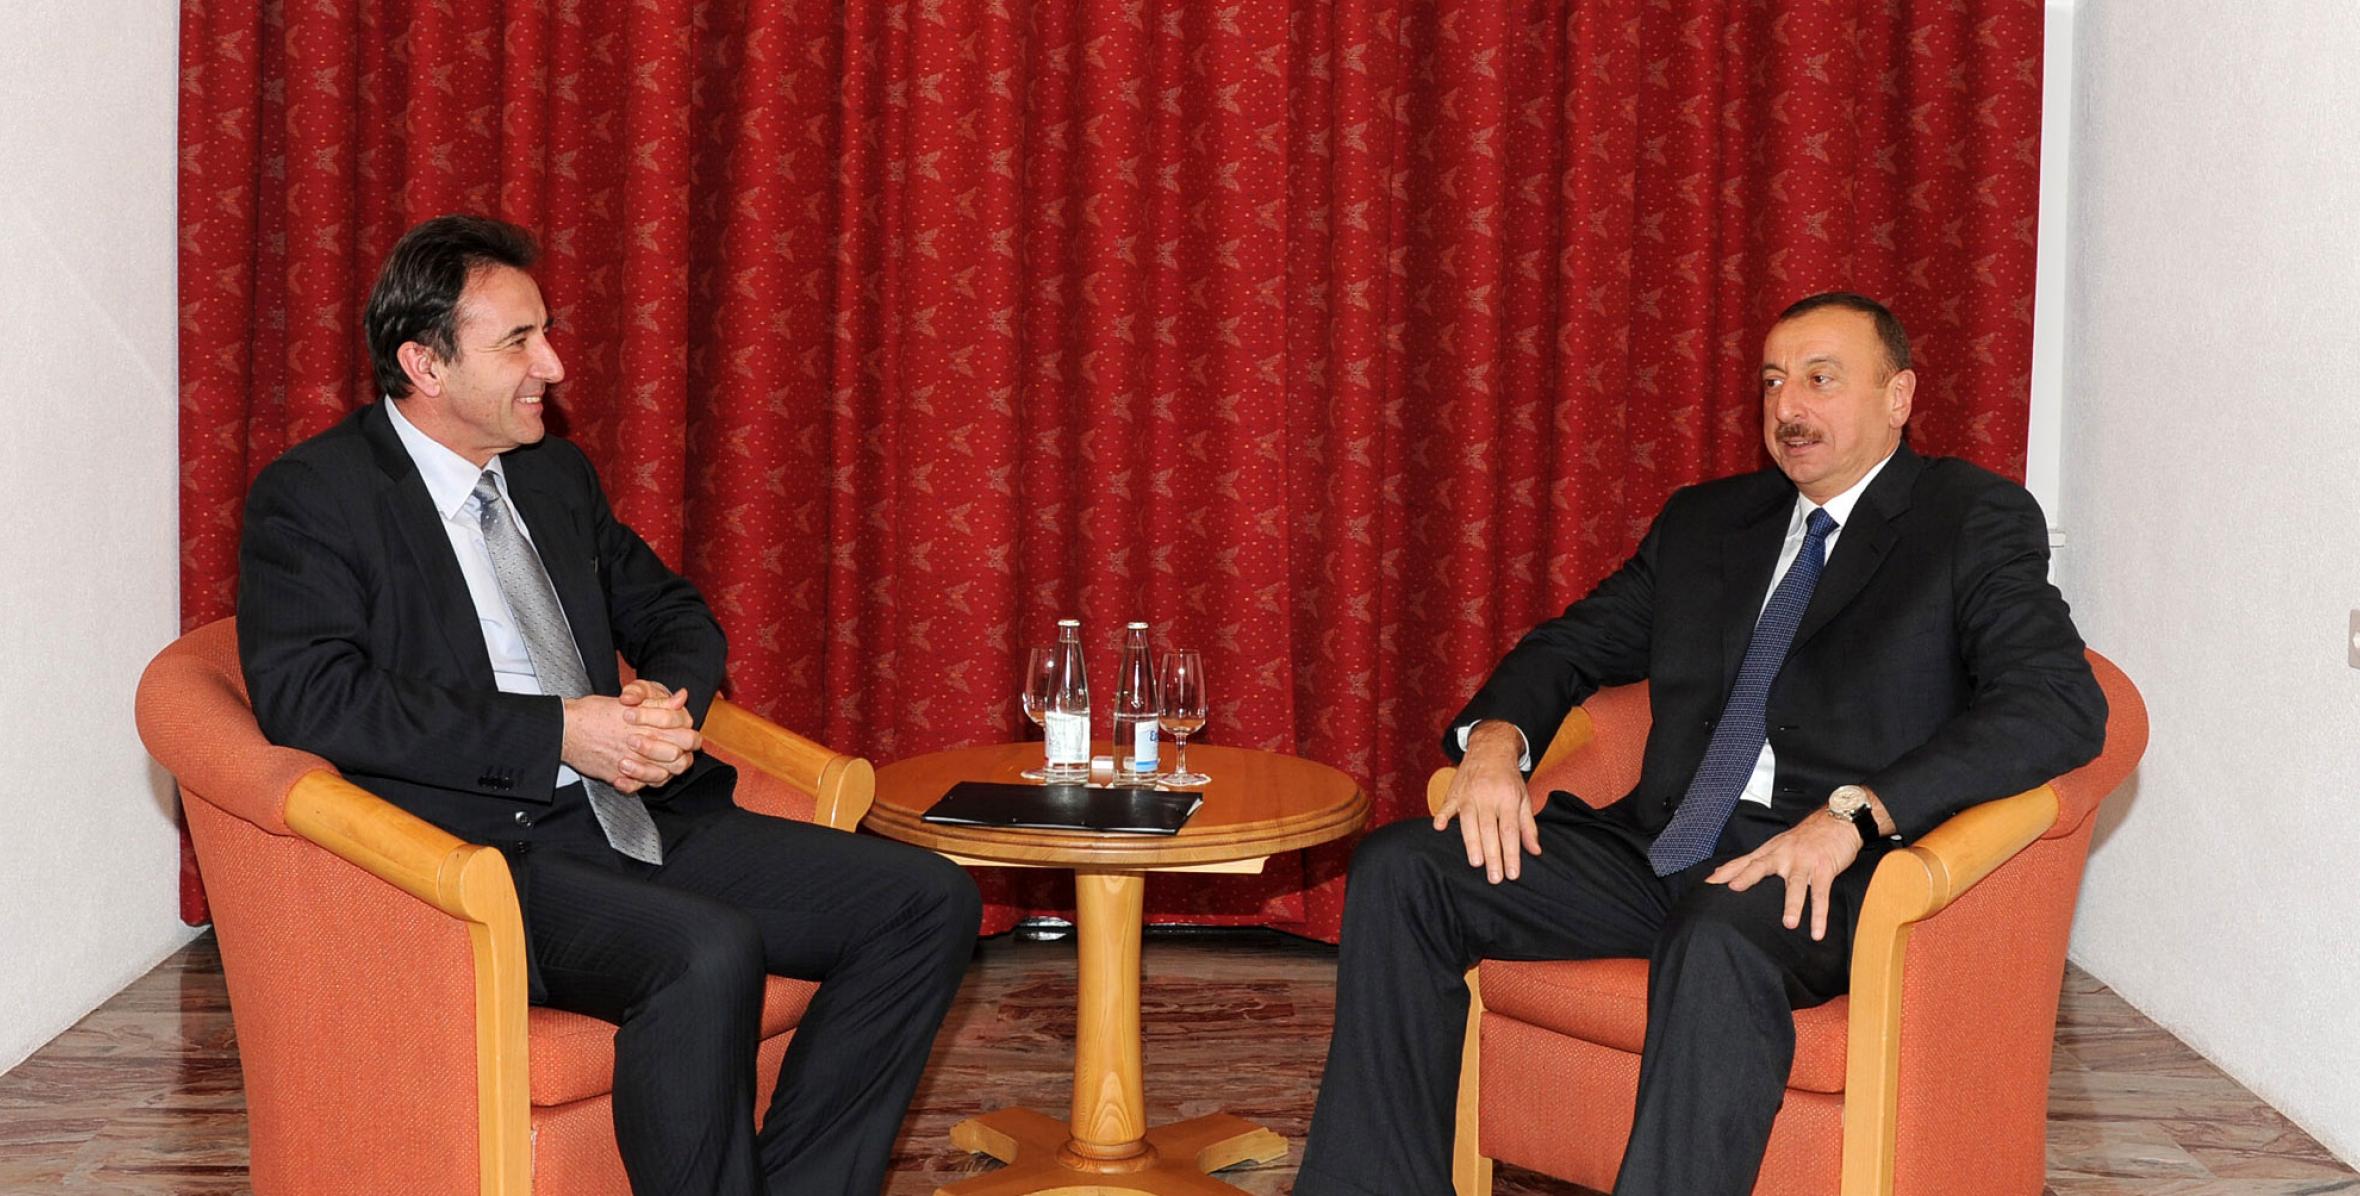 Ilham Aliyev met with Chief Executive Officer of OMV AG Gerhard Roiss in Davos